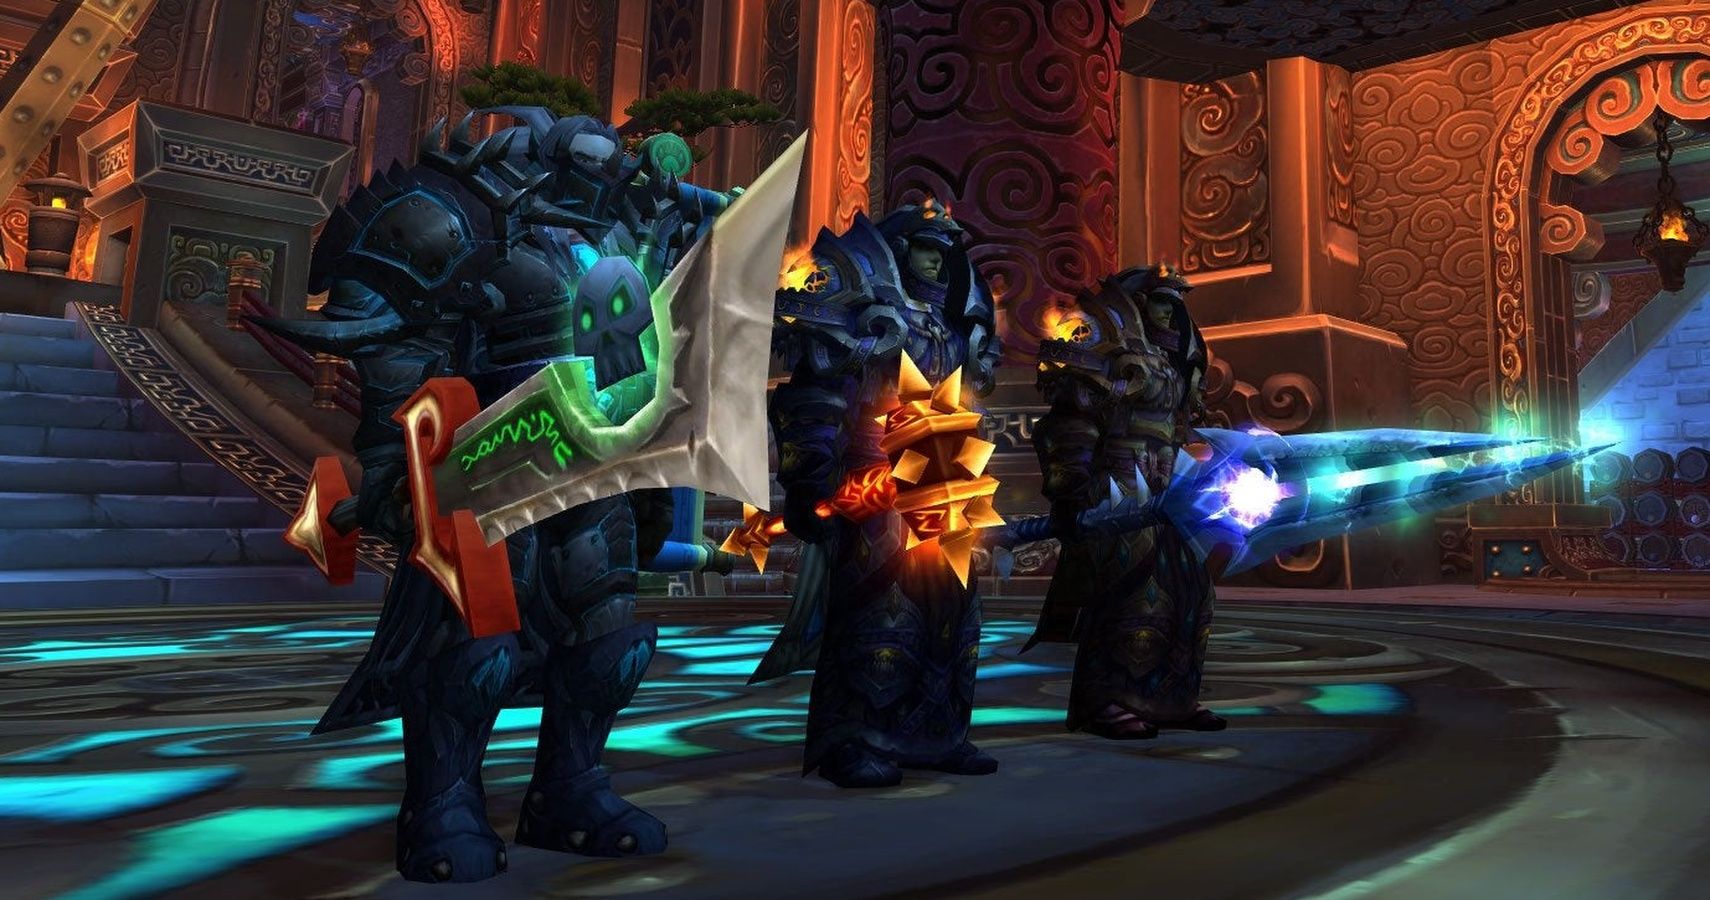 Classic Wow 10 Best Vanity Weapons Ranked